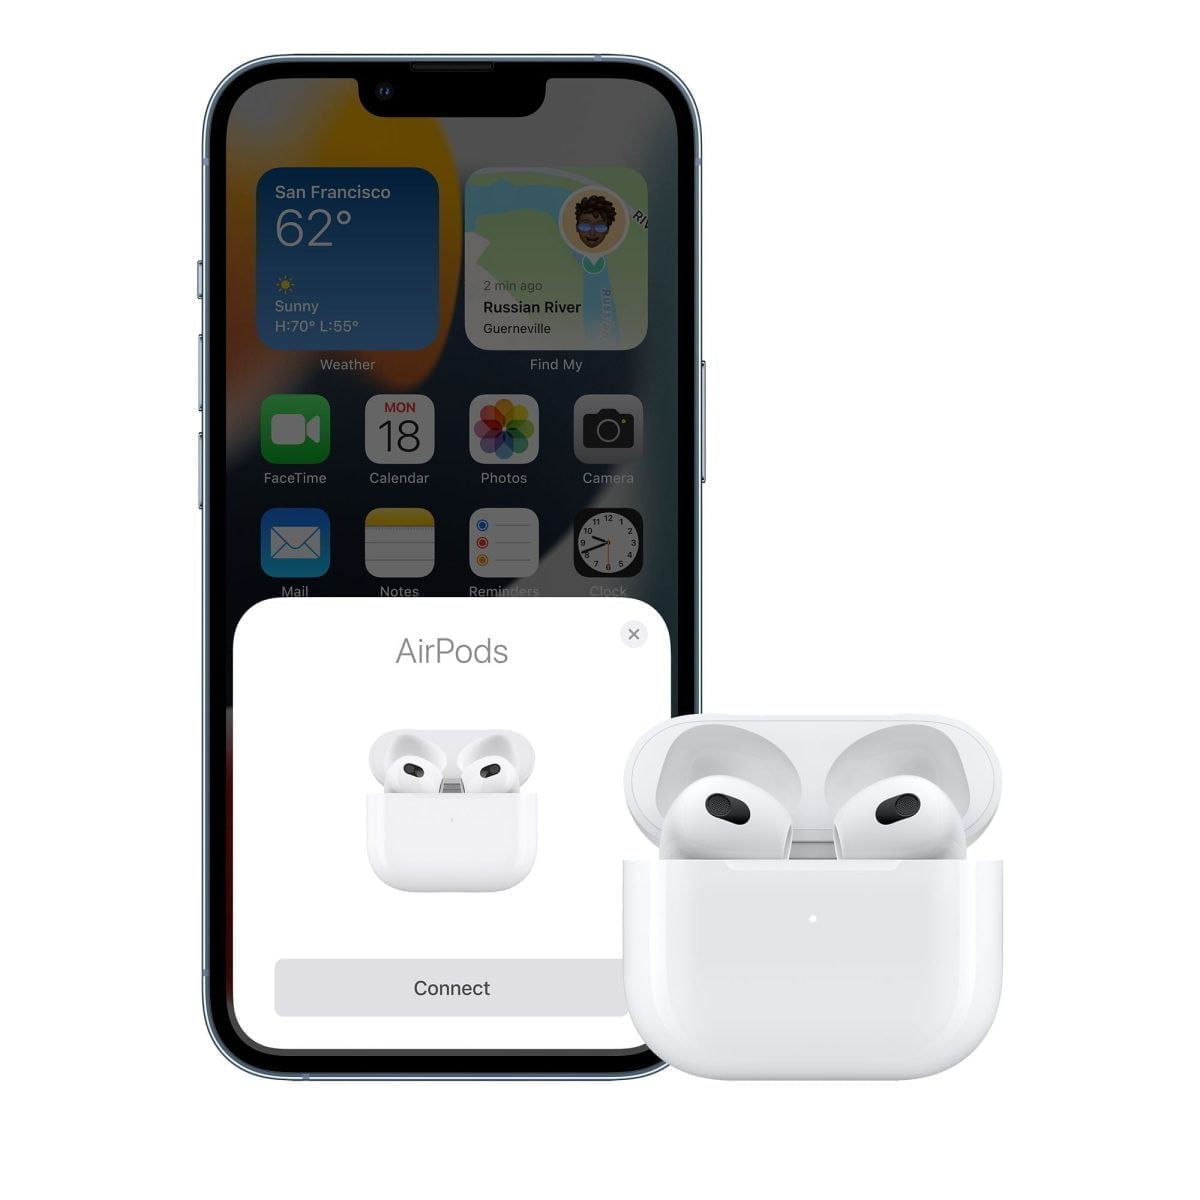 Mme73 Av5 Apple &Lt;H1&Gt;Apple Airpods (3Rd Generation) - White&Lt;/H1&Gt; &Lt;Div Class=&Quot;Rc-Pdsection-Mainpanel Column Large-9 Small-12&Quot;&Gt; &Lt;H2 Class=&Quot;H4-Para-Title&Quot;&Gt;All-New Design&Lt;/H2&Gt; &Lt;Div Class=&Quot;Para-List As-Pdp-Lastparalist&Quot;&Gt; Airpods Are Lightweight And Offer A Contoured Design. They Sit At Just The Right Angle For Comfort And To Better Direct Audio To Your Ear. The Stem Is 33 Percent Shorter Than Airpods (2Nd Generation) And Includes A Force Sensor To Easily Control Music And Calls. &Lt;/Div&Gt; &Lt;/Div&Gt; Apple Airpods Apple Airpods (3Rd Generation) - White (Mme73)